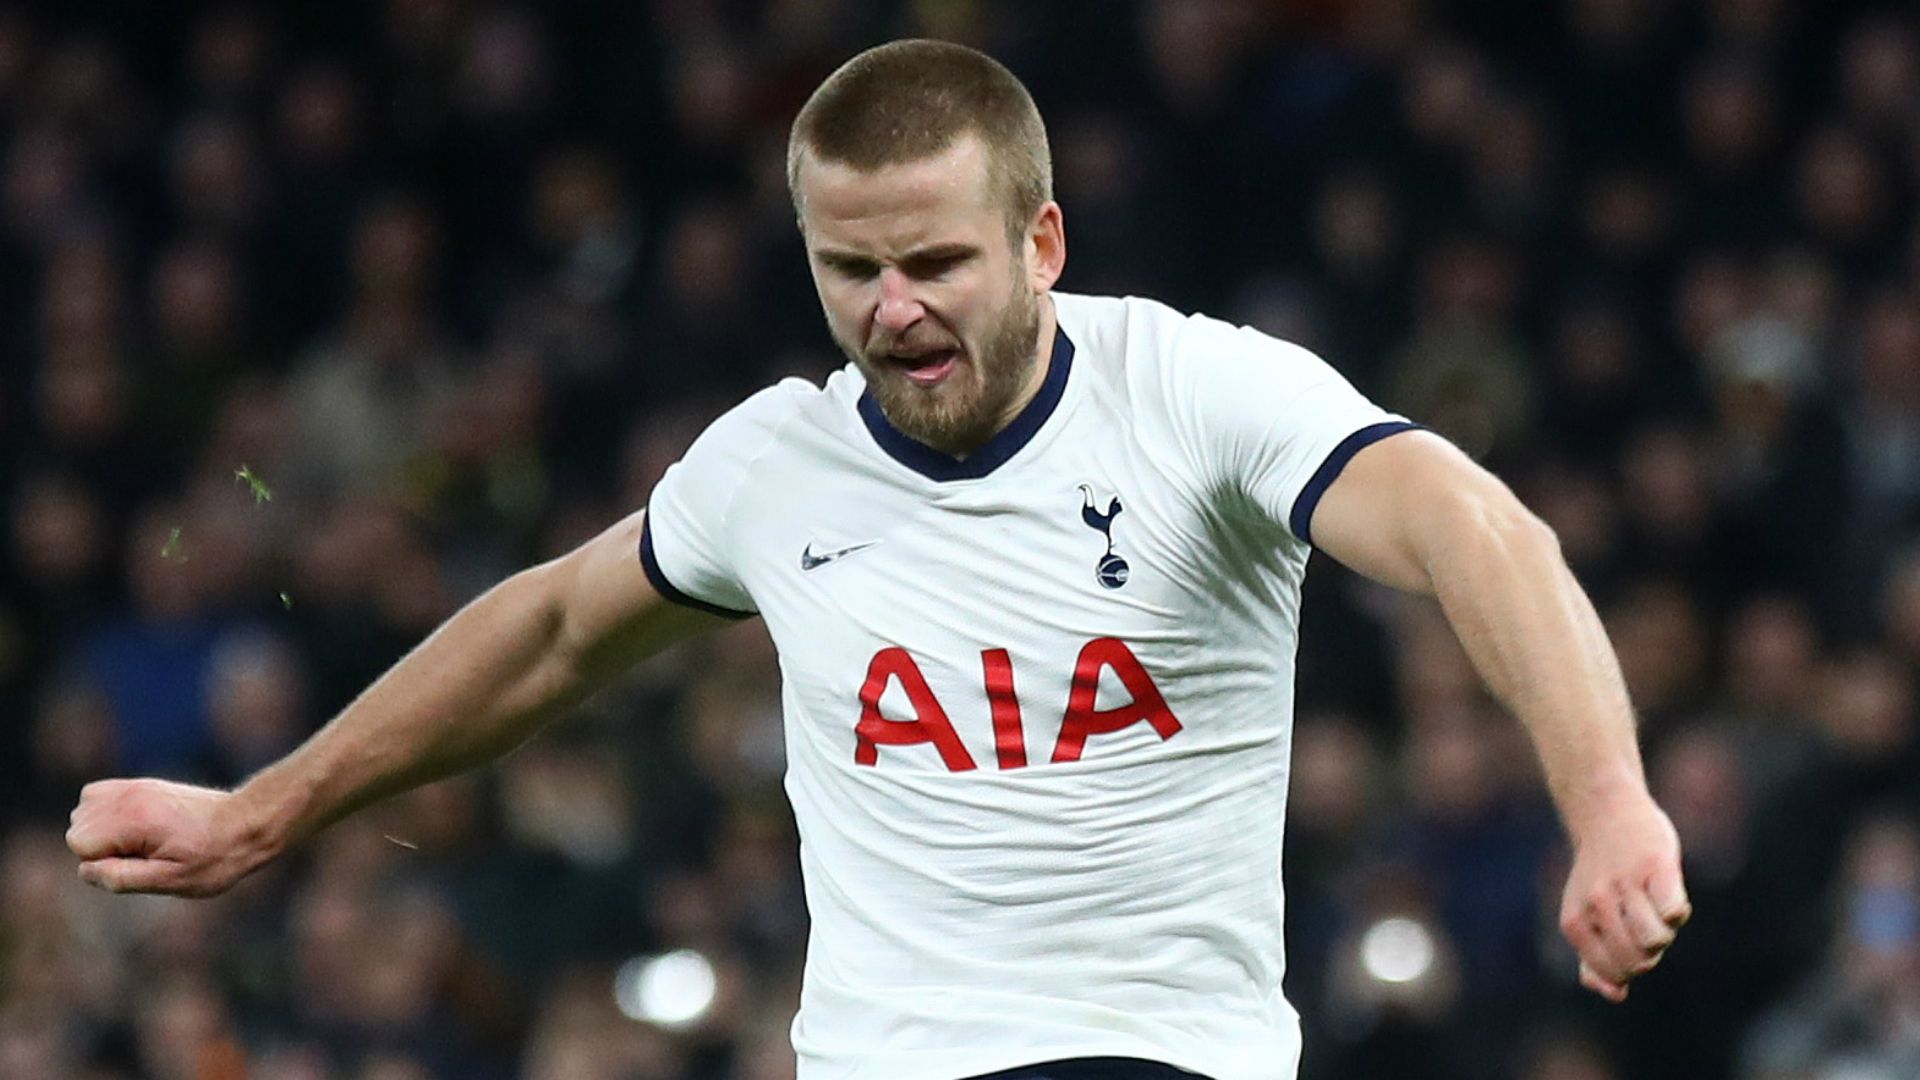 Dier like David Luiz & new deal raises questions' star 'not at the level' Spurs need, says Bent